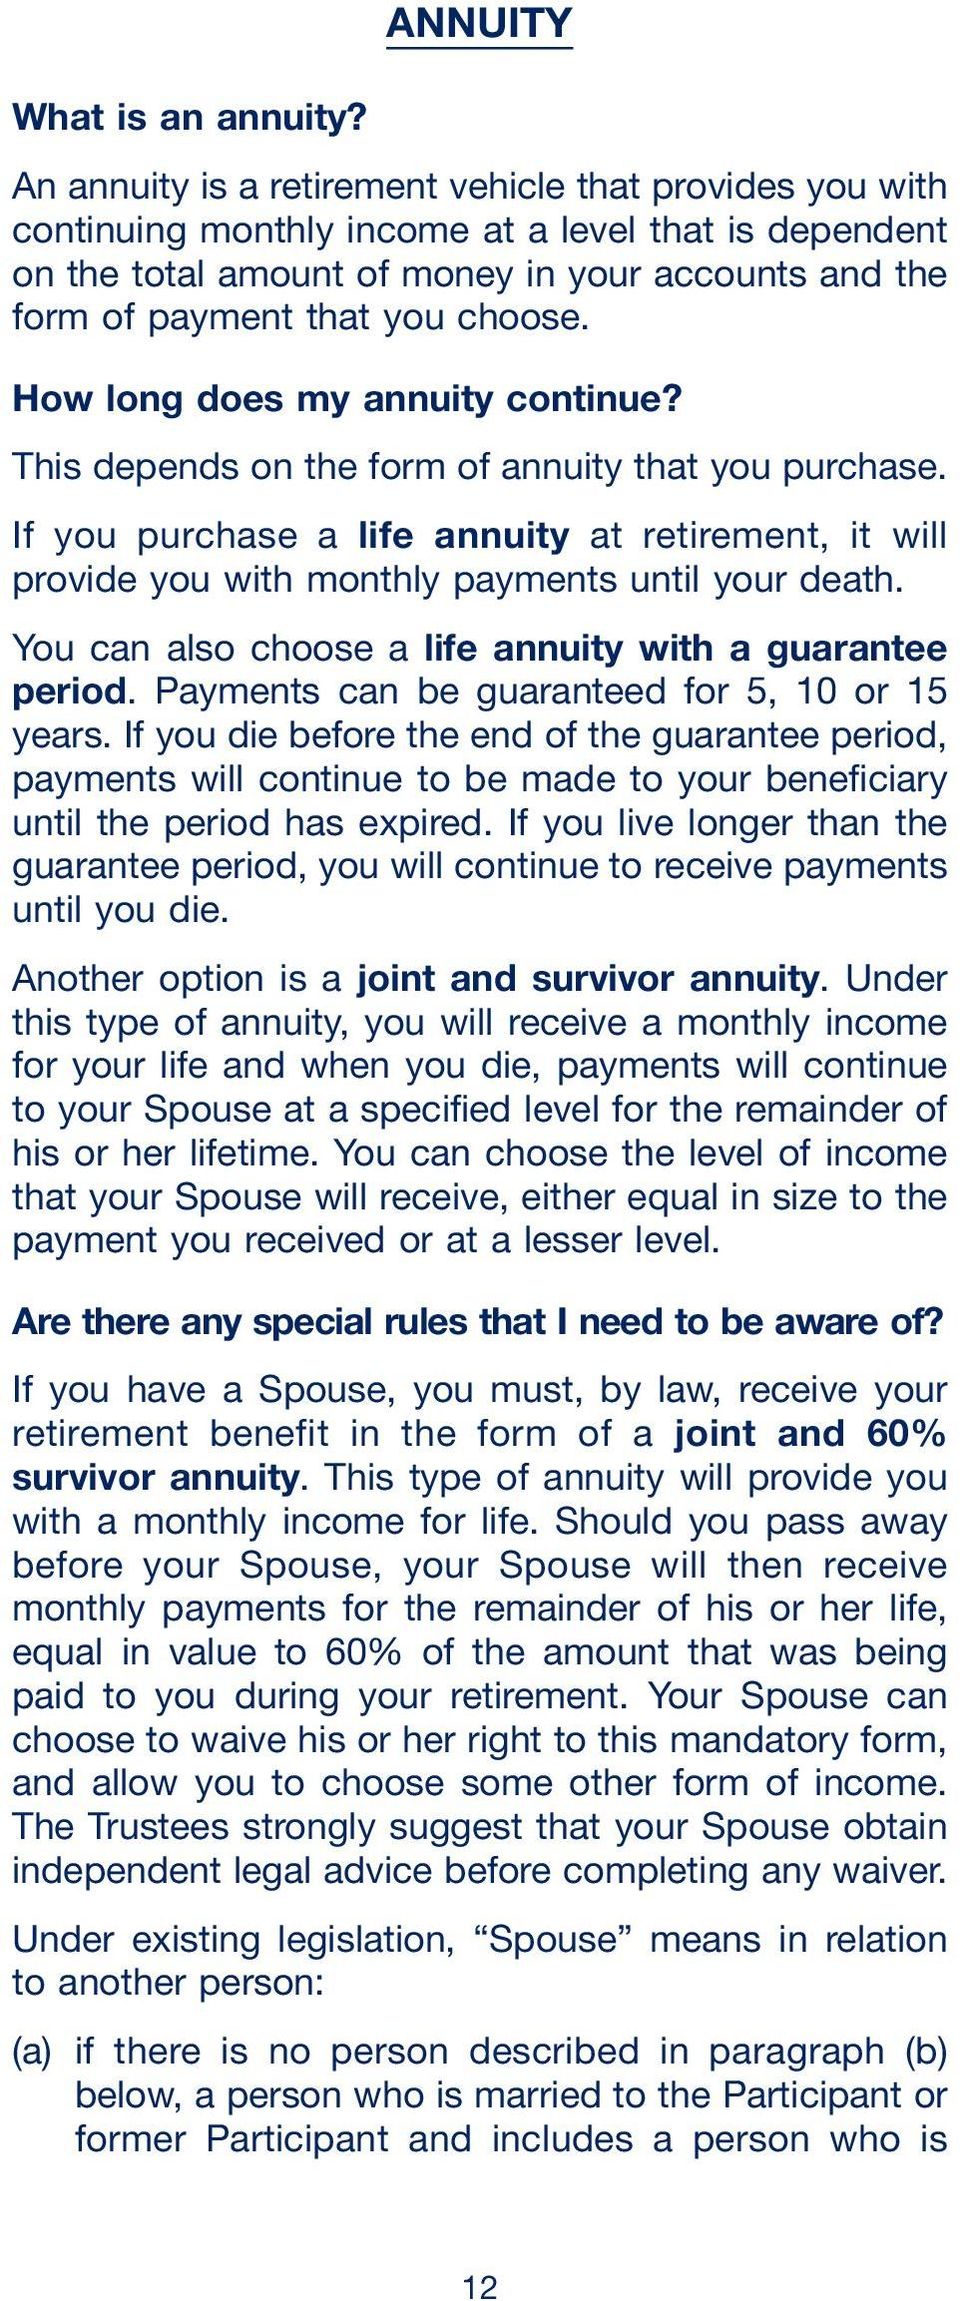 How long does my annuity continue? This depends on the form of annuity that you purchase. If you purchase a life annuity at retirement, it will provide you with monthly payments until your death.